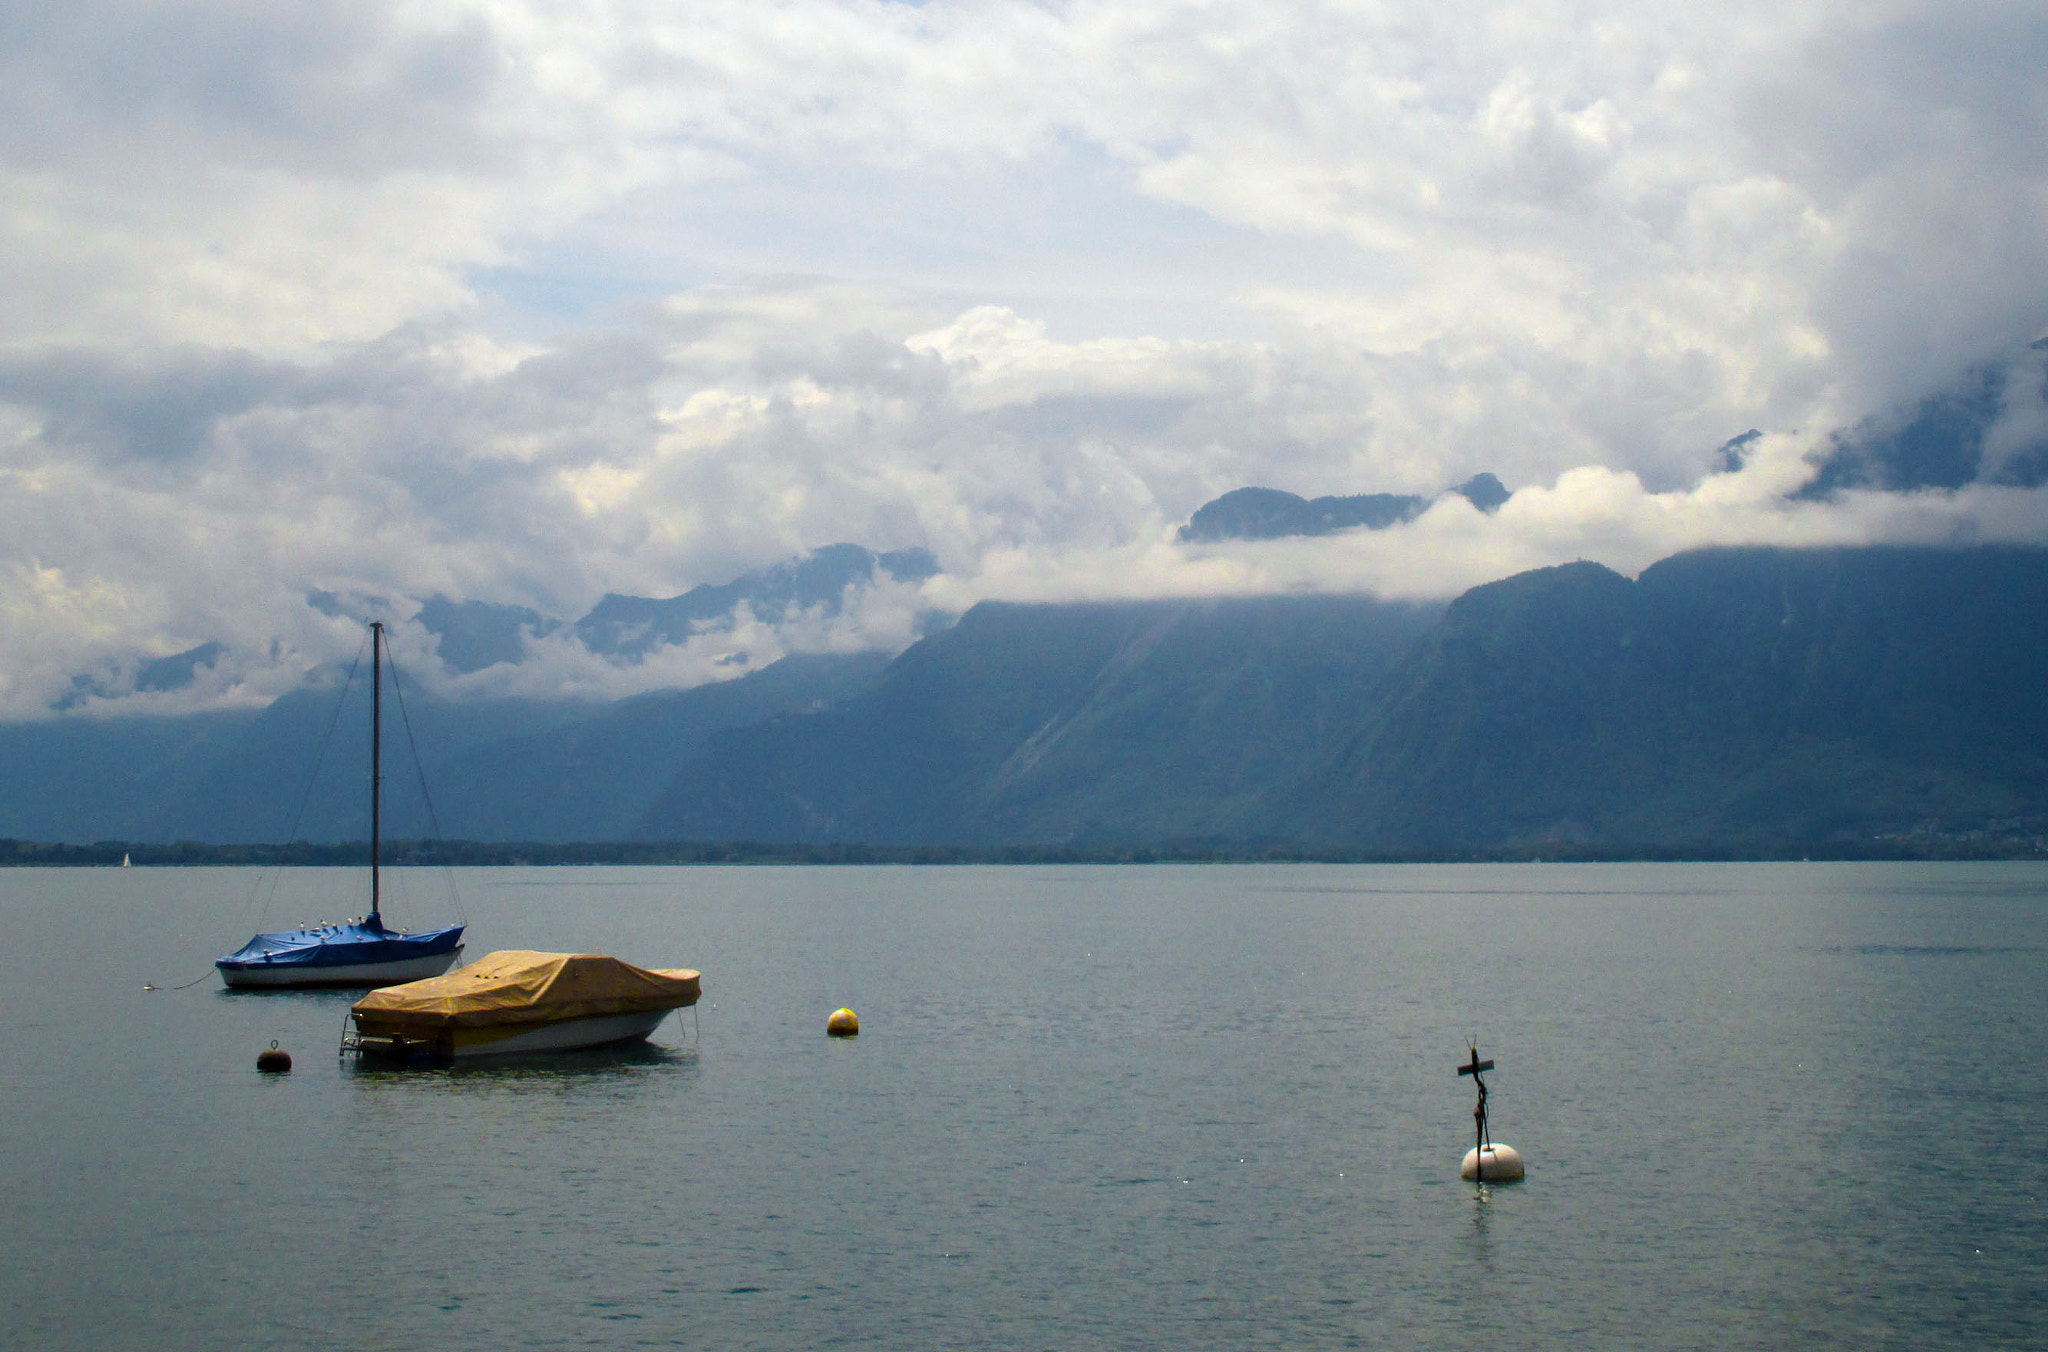 Canon PowerShot ELPH 130 IS (IXUS 140 / IXY 110F) sample photo. Lac leman from montreux photography